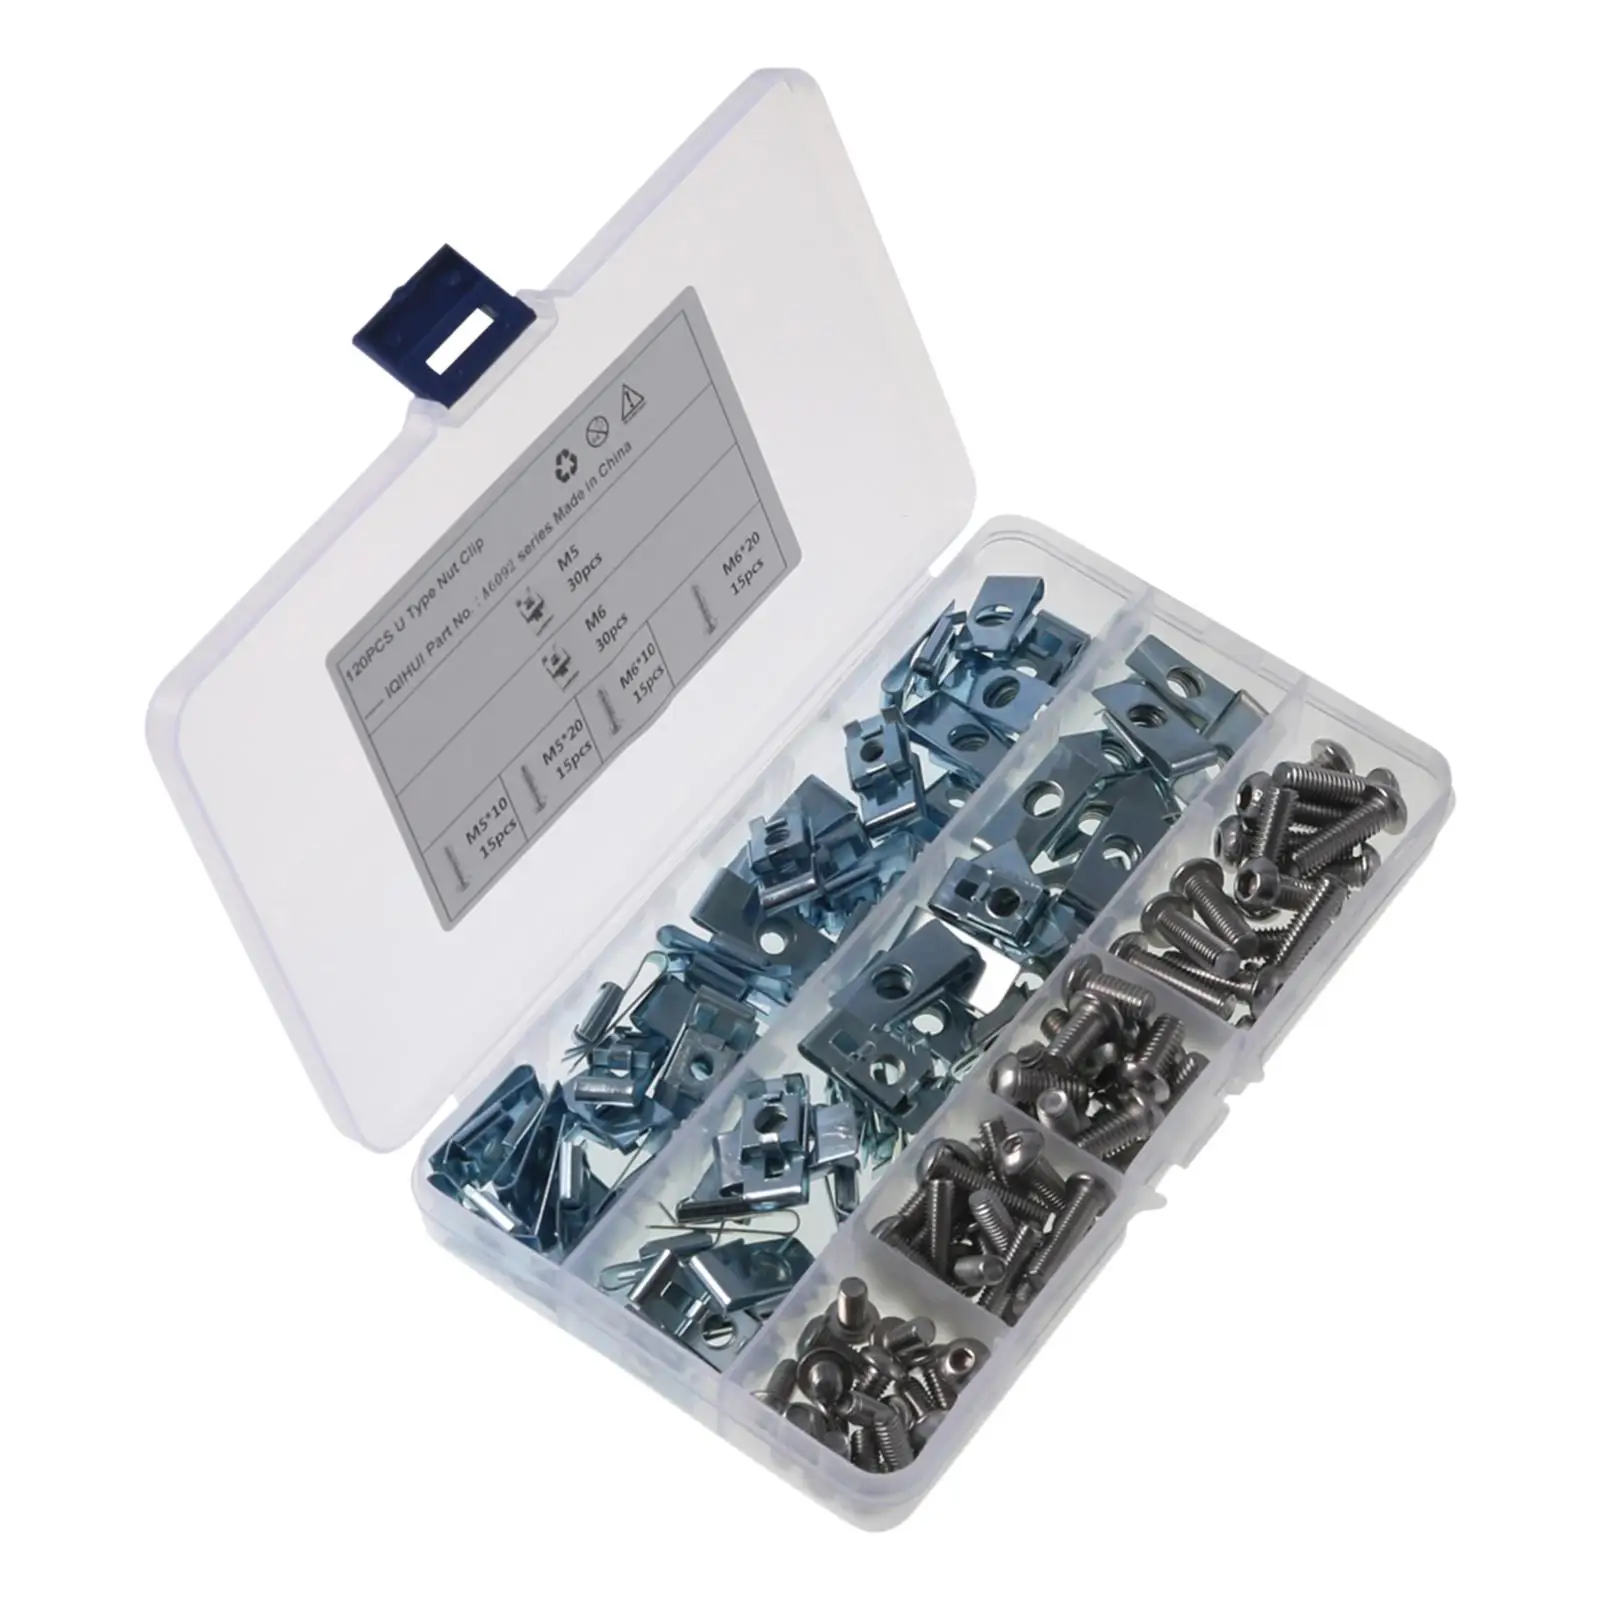 120 Pieces clip Nut Screws Assortment Kit Replacement with Storage Case Accessories Mounting Durable for Car Electric Car